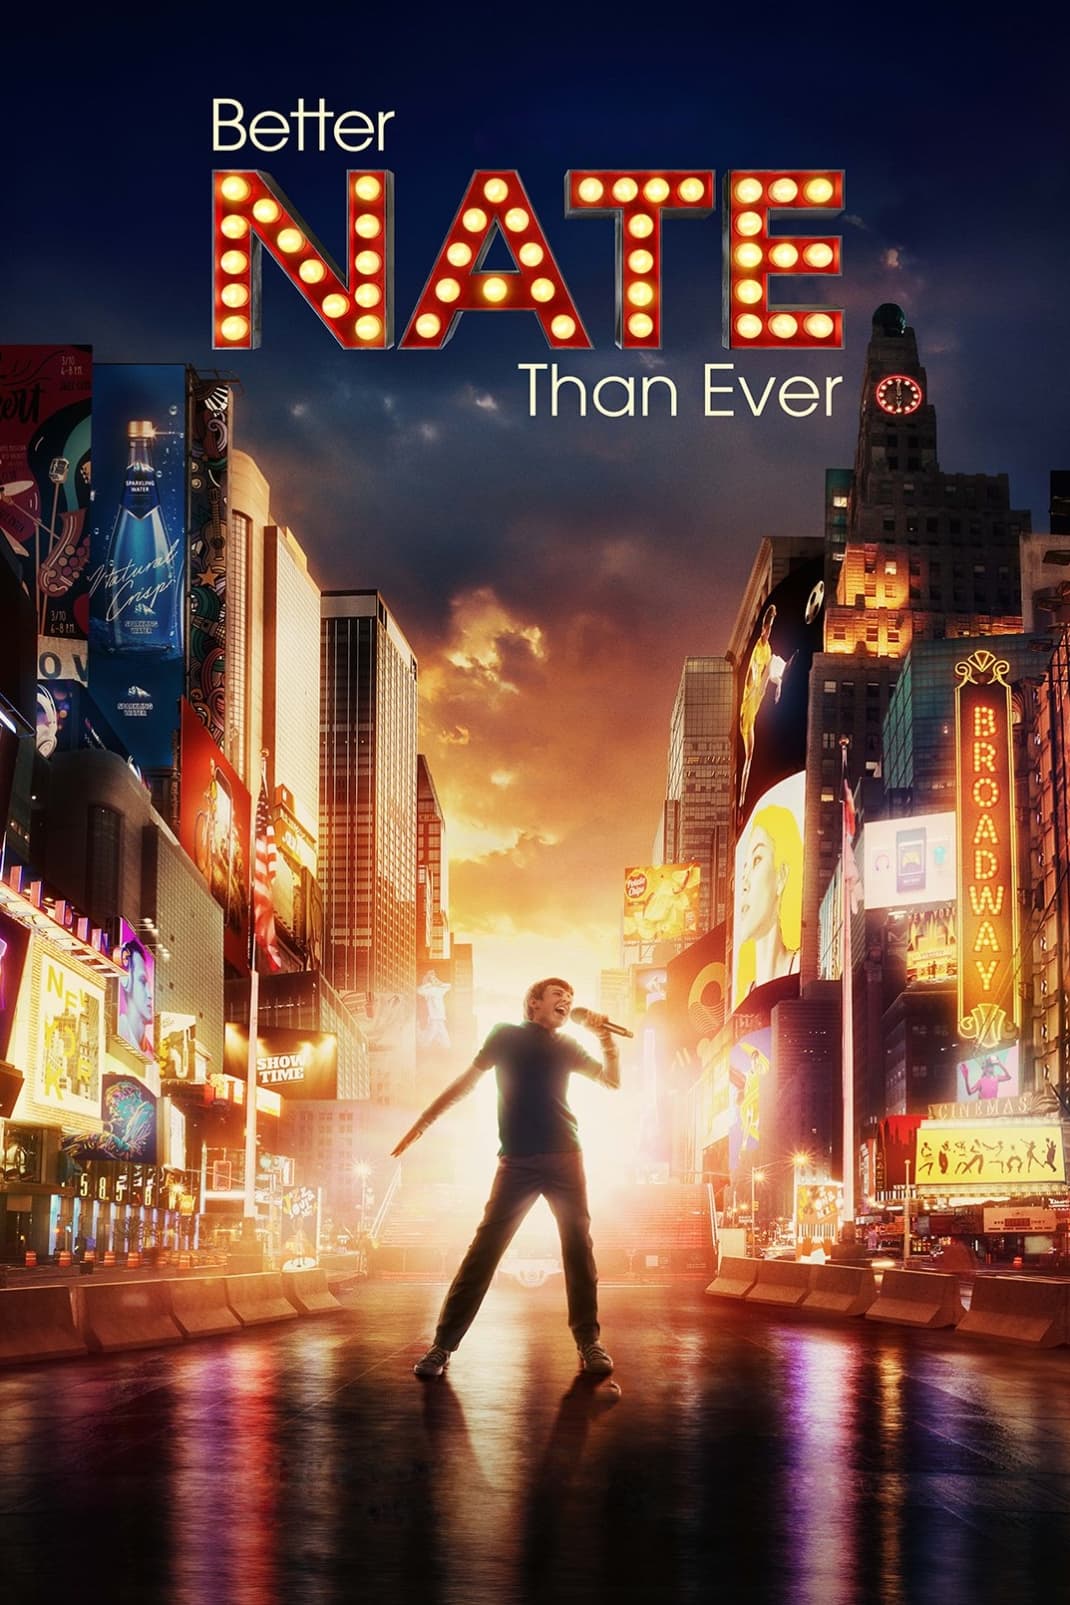 Poster for the movie "Better Nate Than Ever"